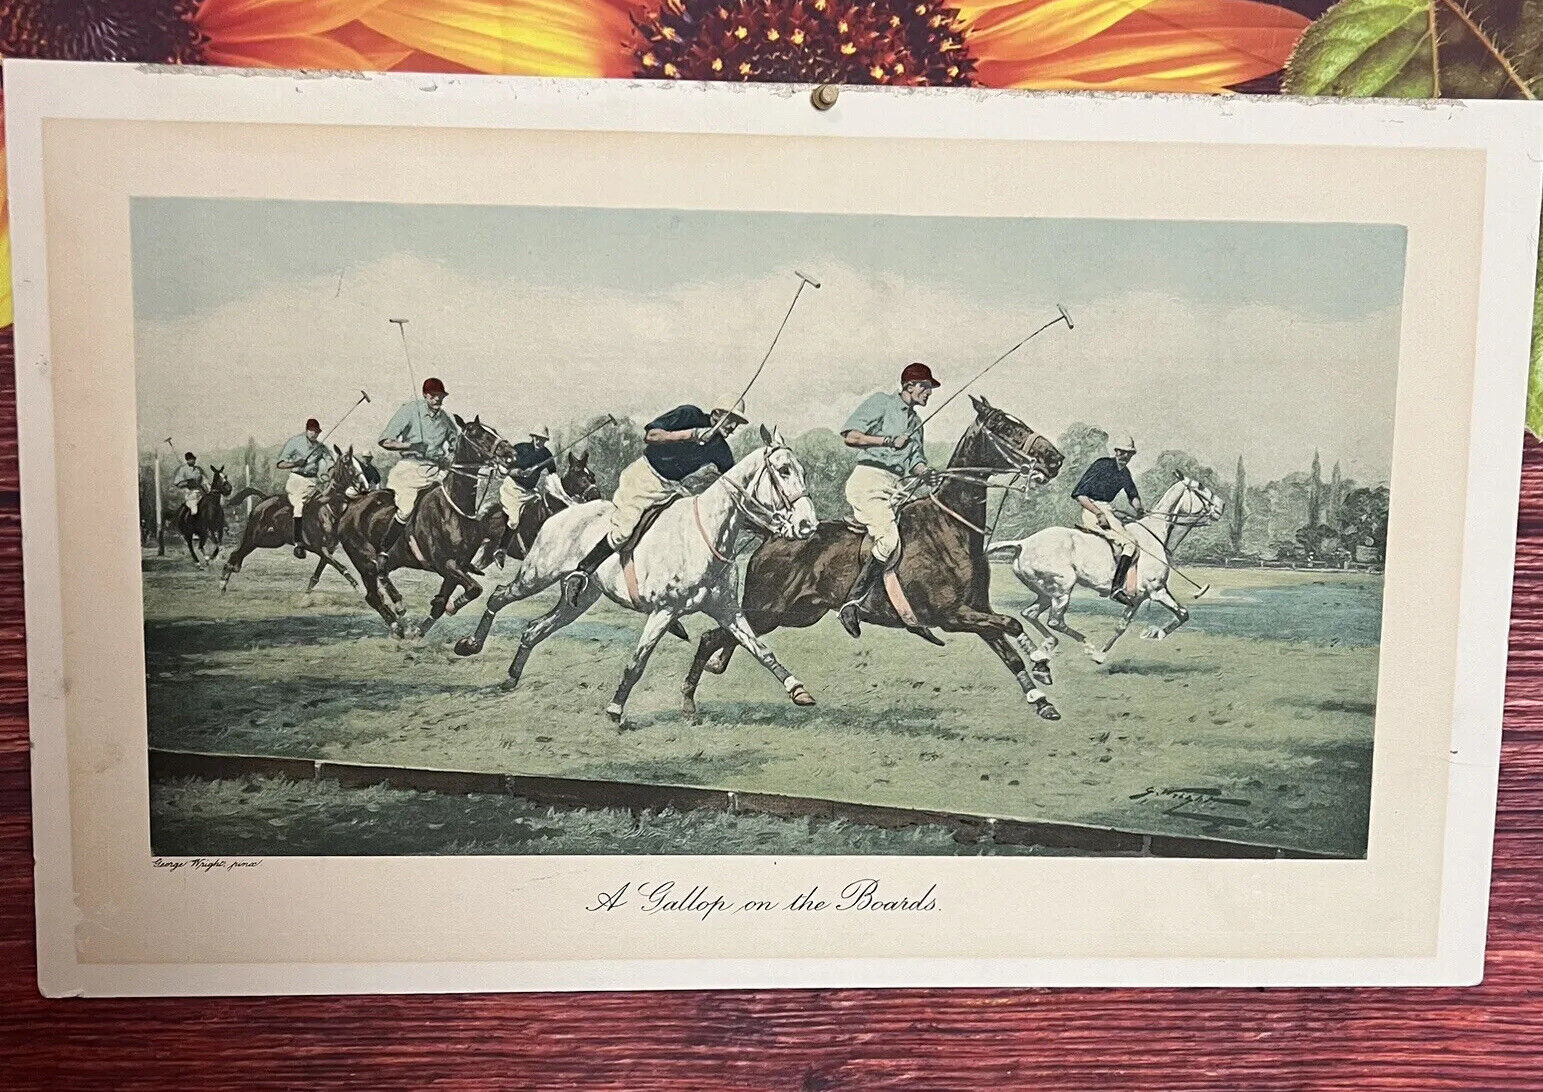 26” GEORGE WRIGHT   A Gallop on the Boards vintage print